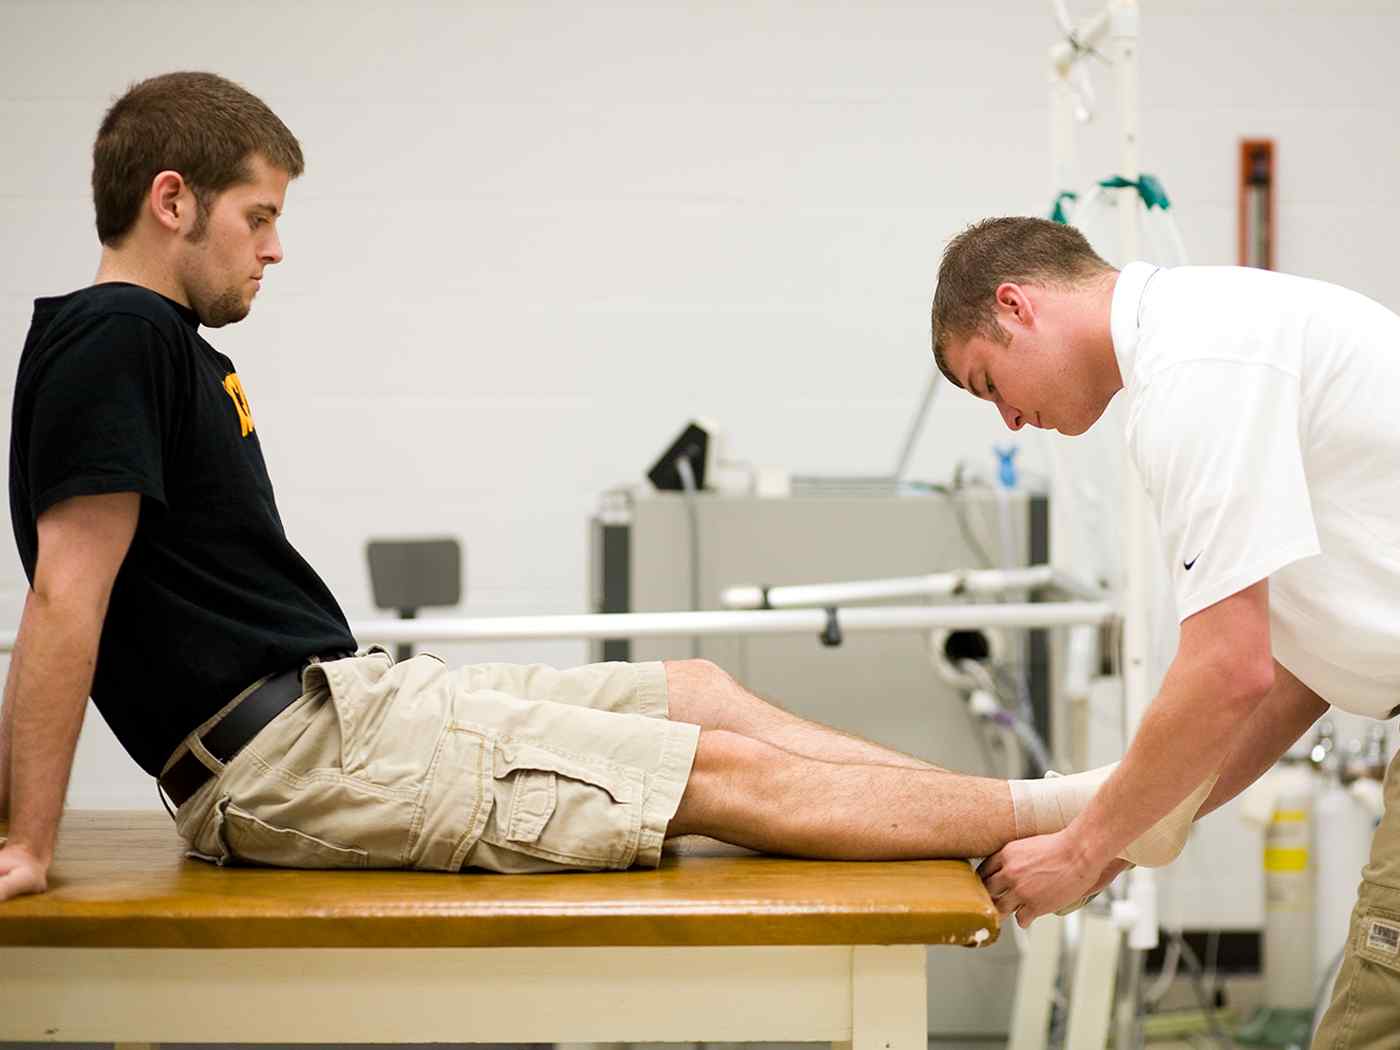 An athletic training student wraps another student's foot